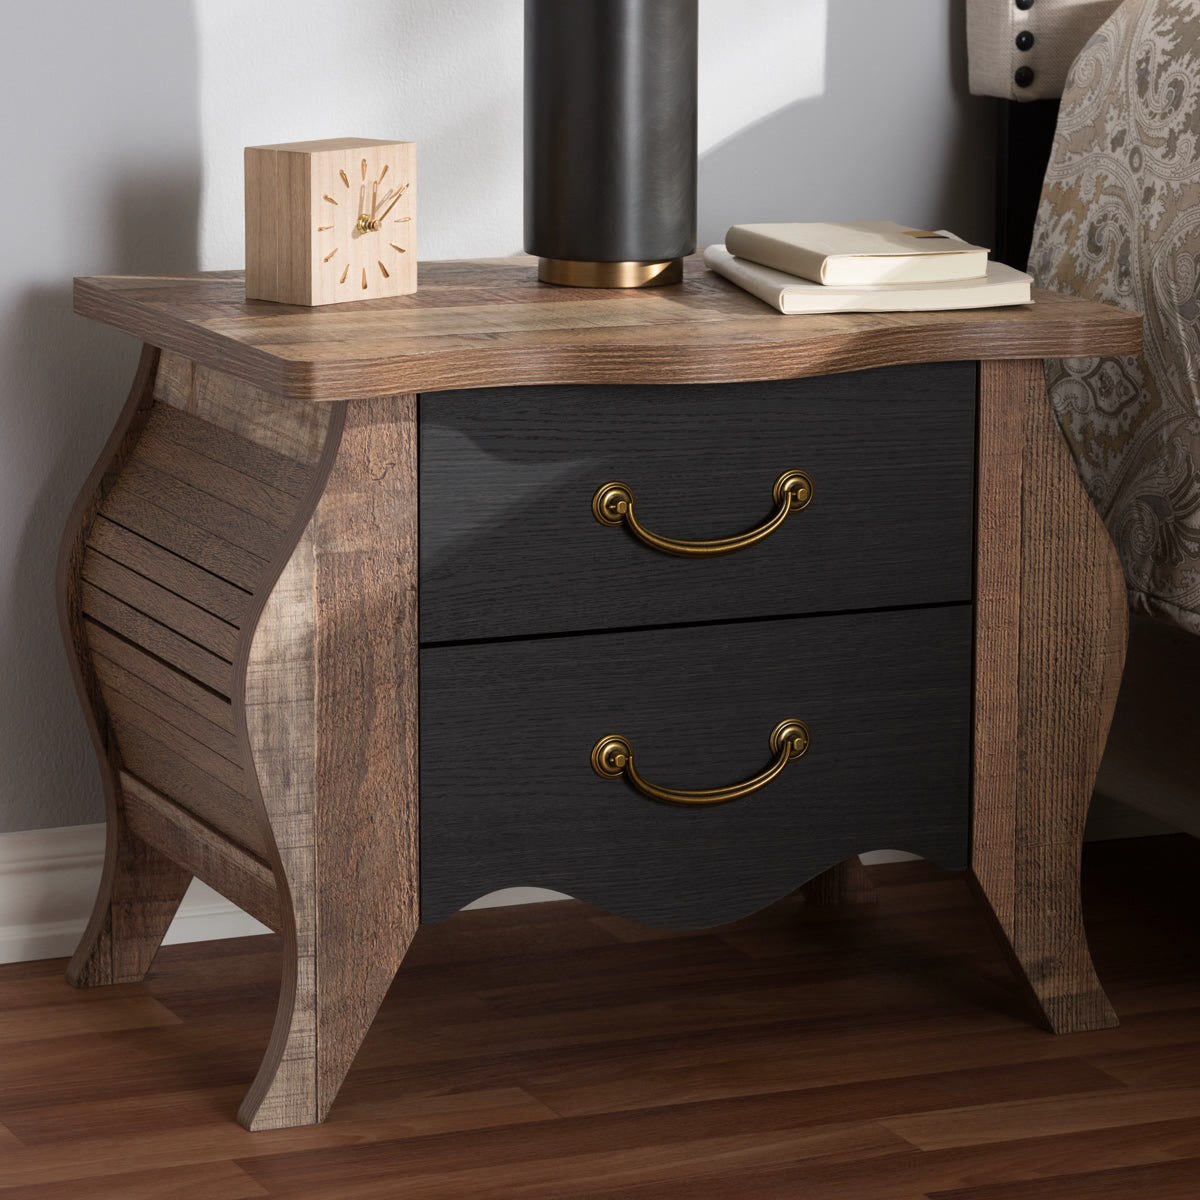 Baxton Studio Romilly Country Cottage Farmhouse Black and Oak-Finished Wood 2-Drawer Nightstand Baxton Studio-nightstands-Minimal And Modern - 9